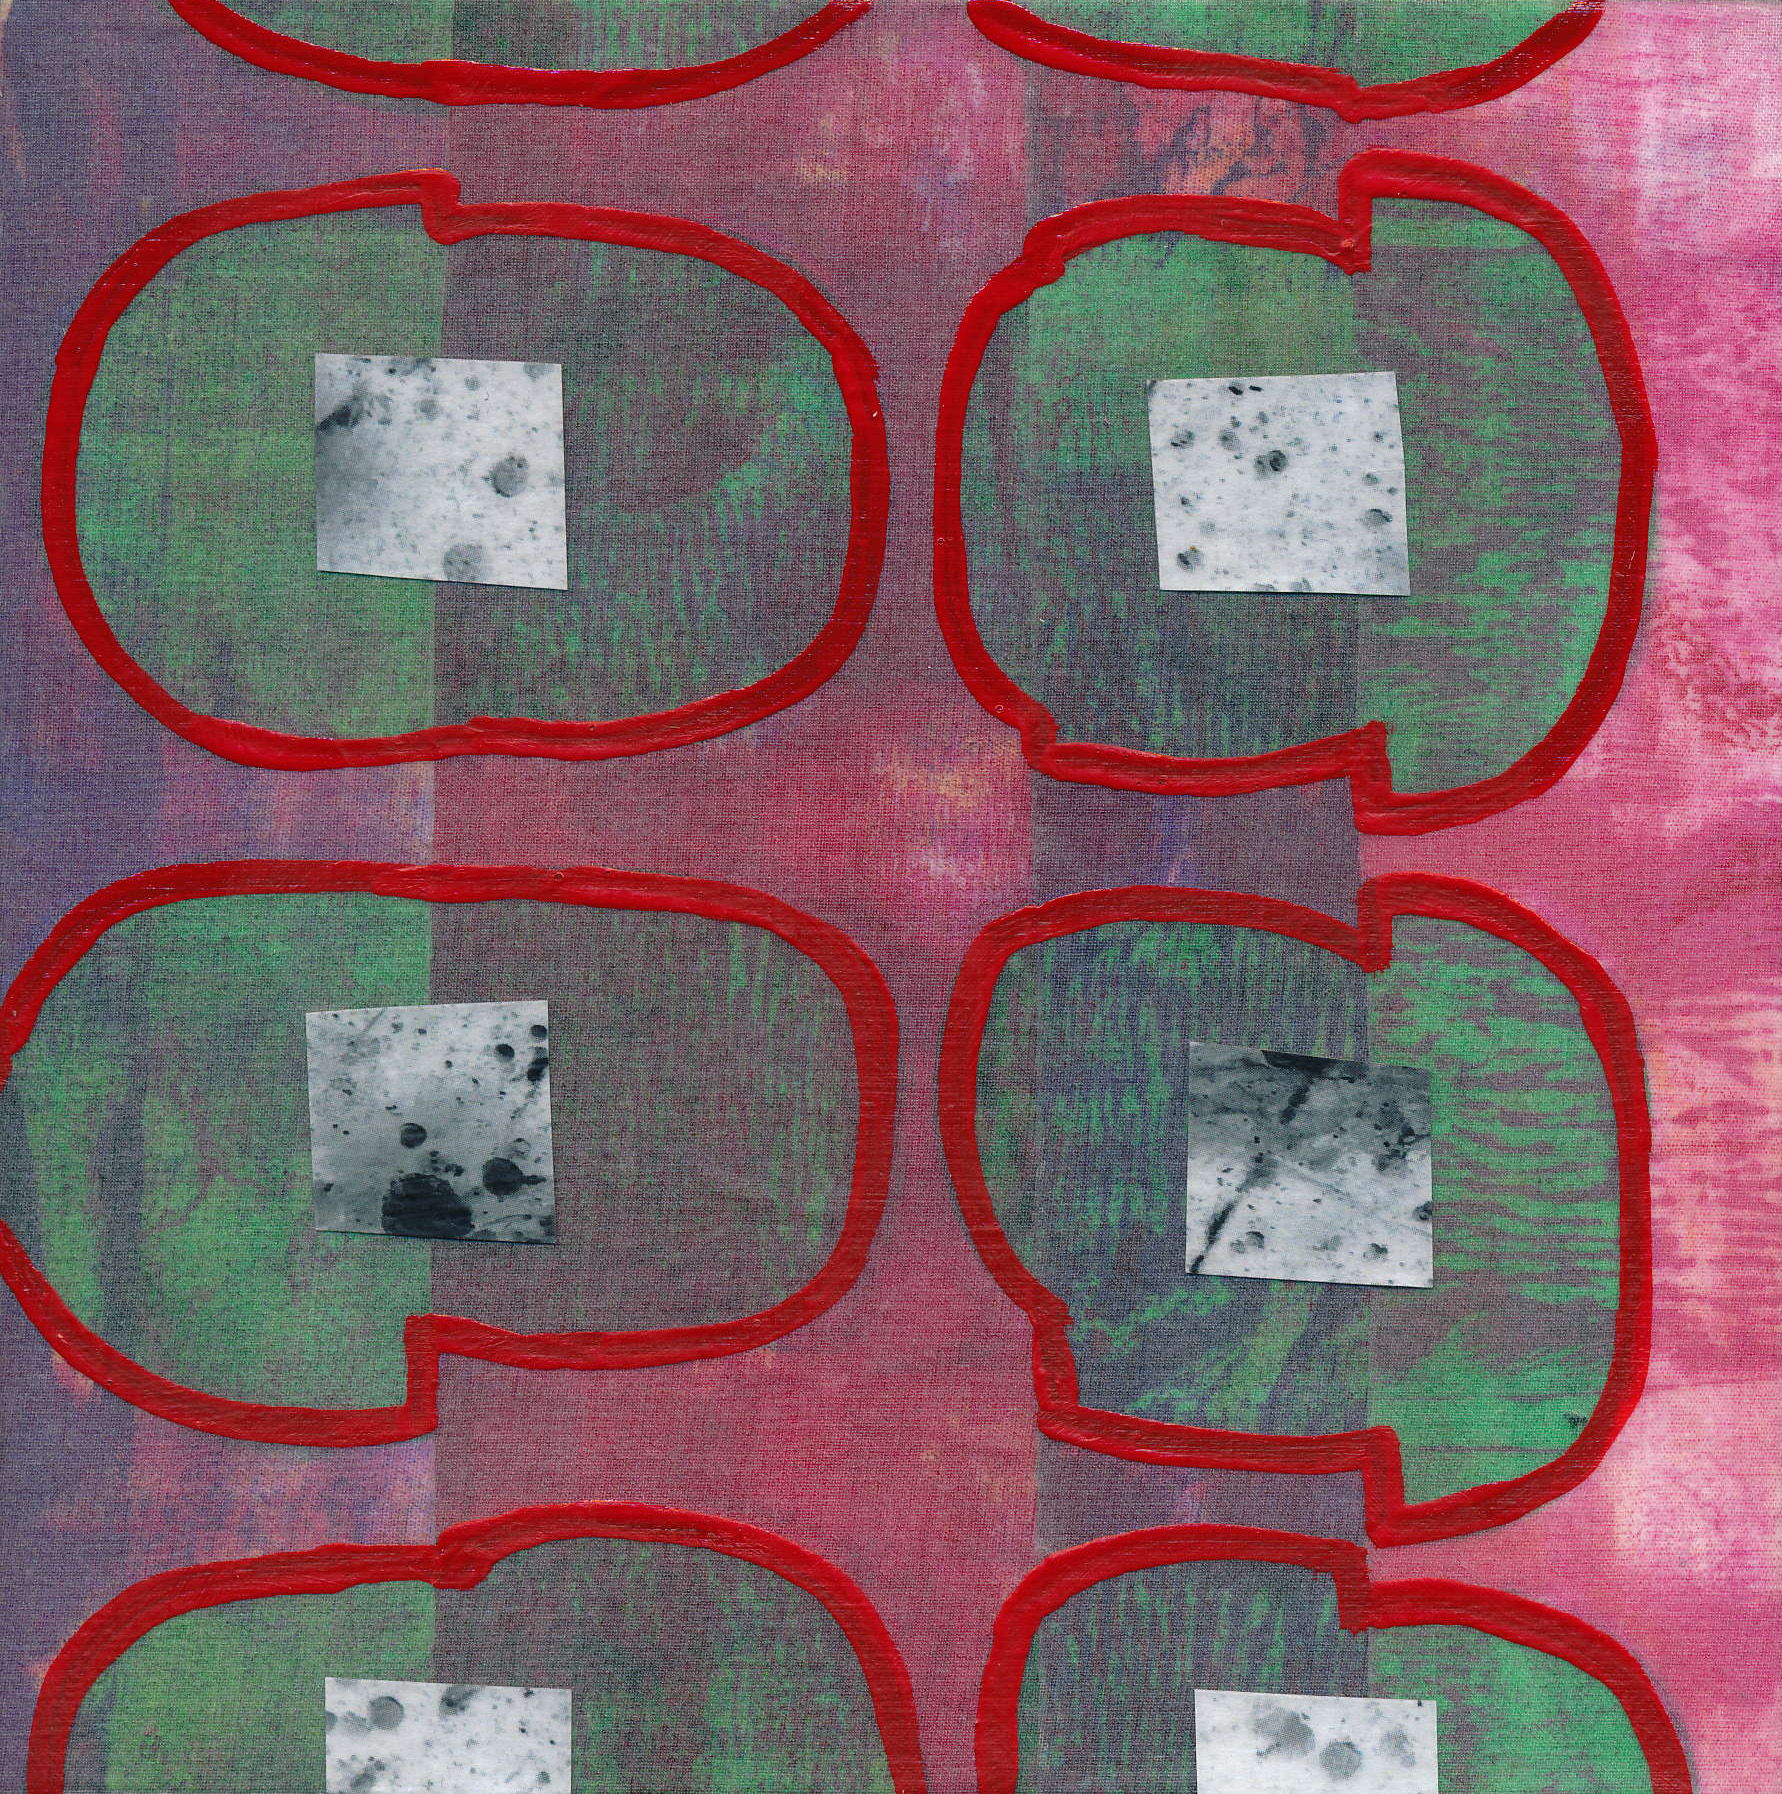  Jeanne Williamson,  Fragments from Ice on Fences #15 , mixed media on board, 6x6 